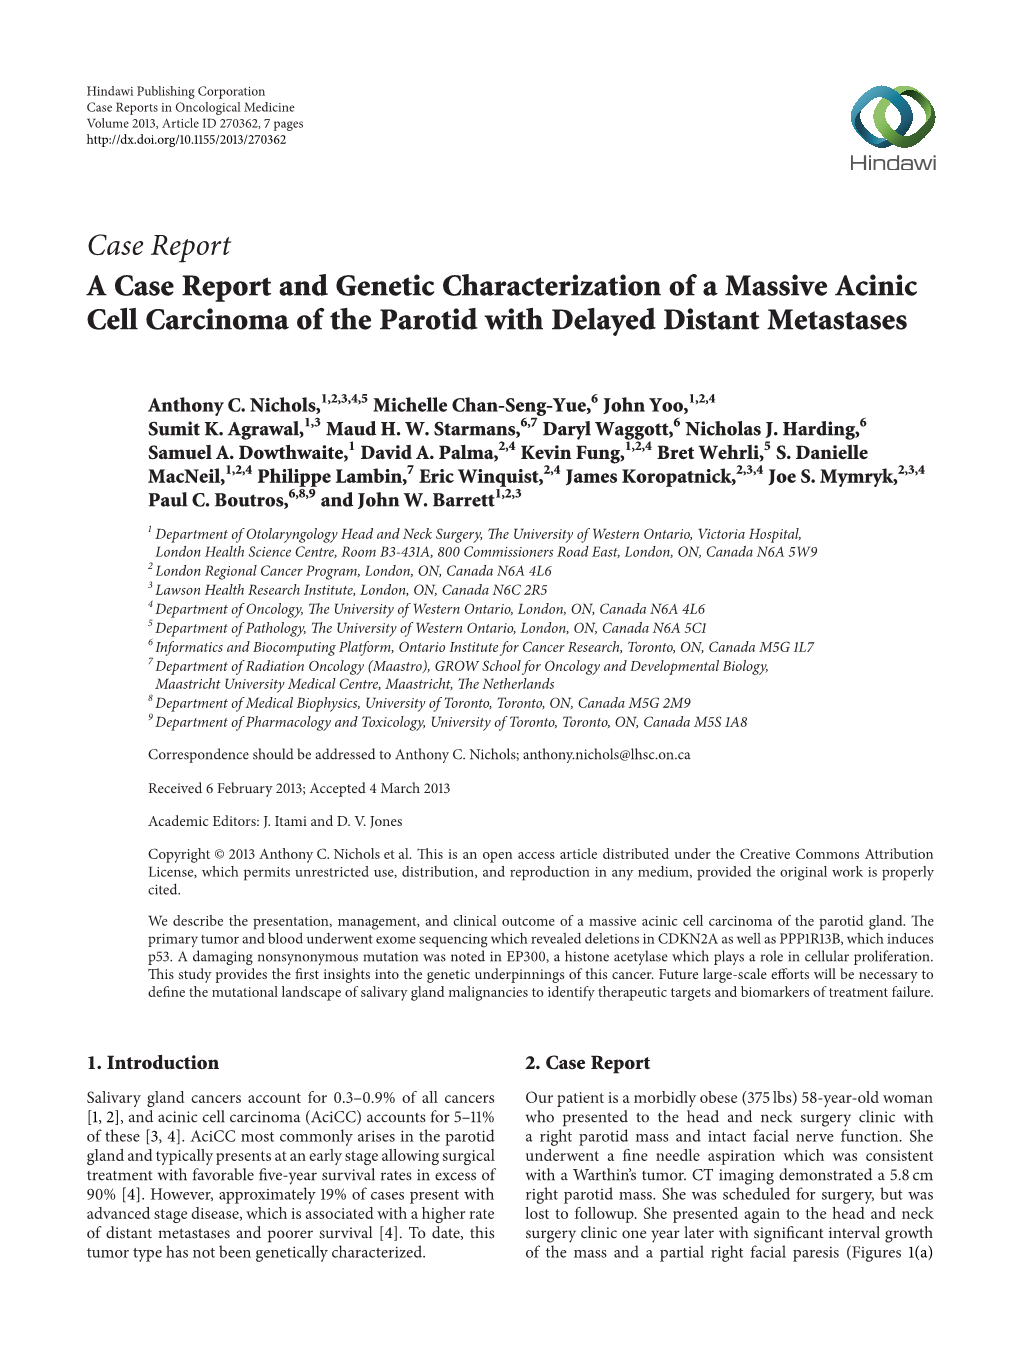 A Case Report and Genetic Characterization of a Massive Acinic Cell Carcinoma of the Parotid with Delayed Distant Metastases